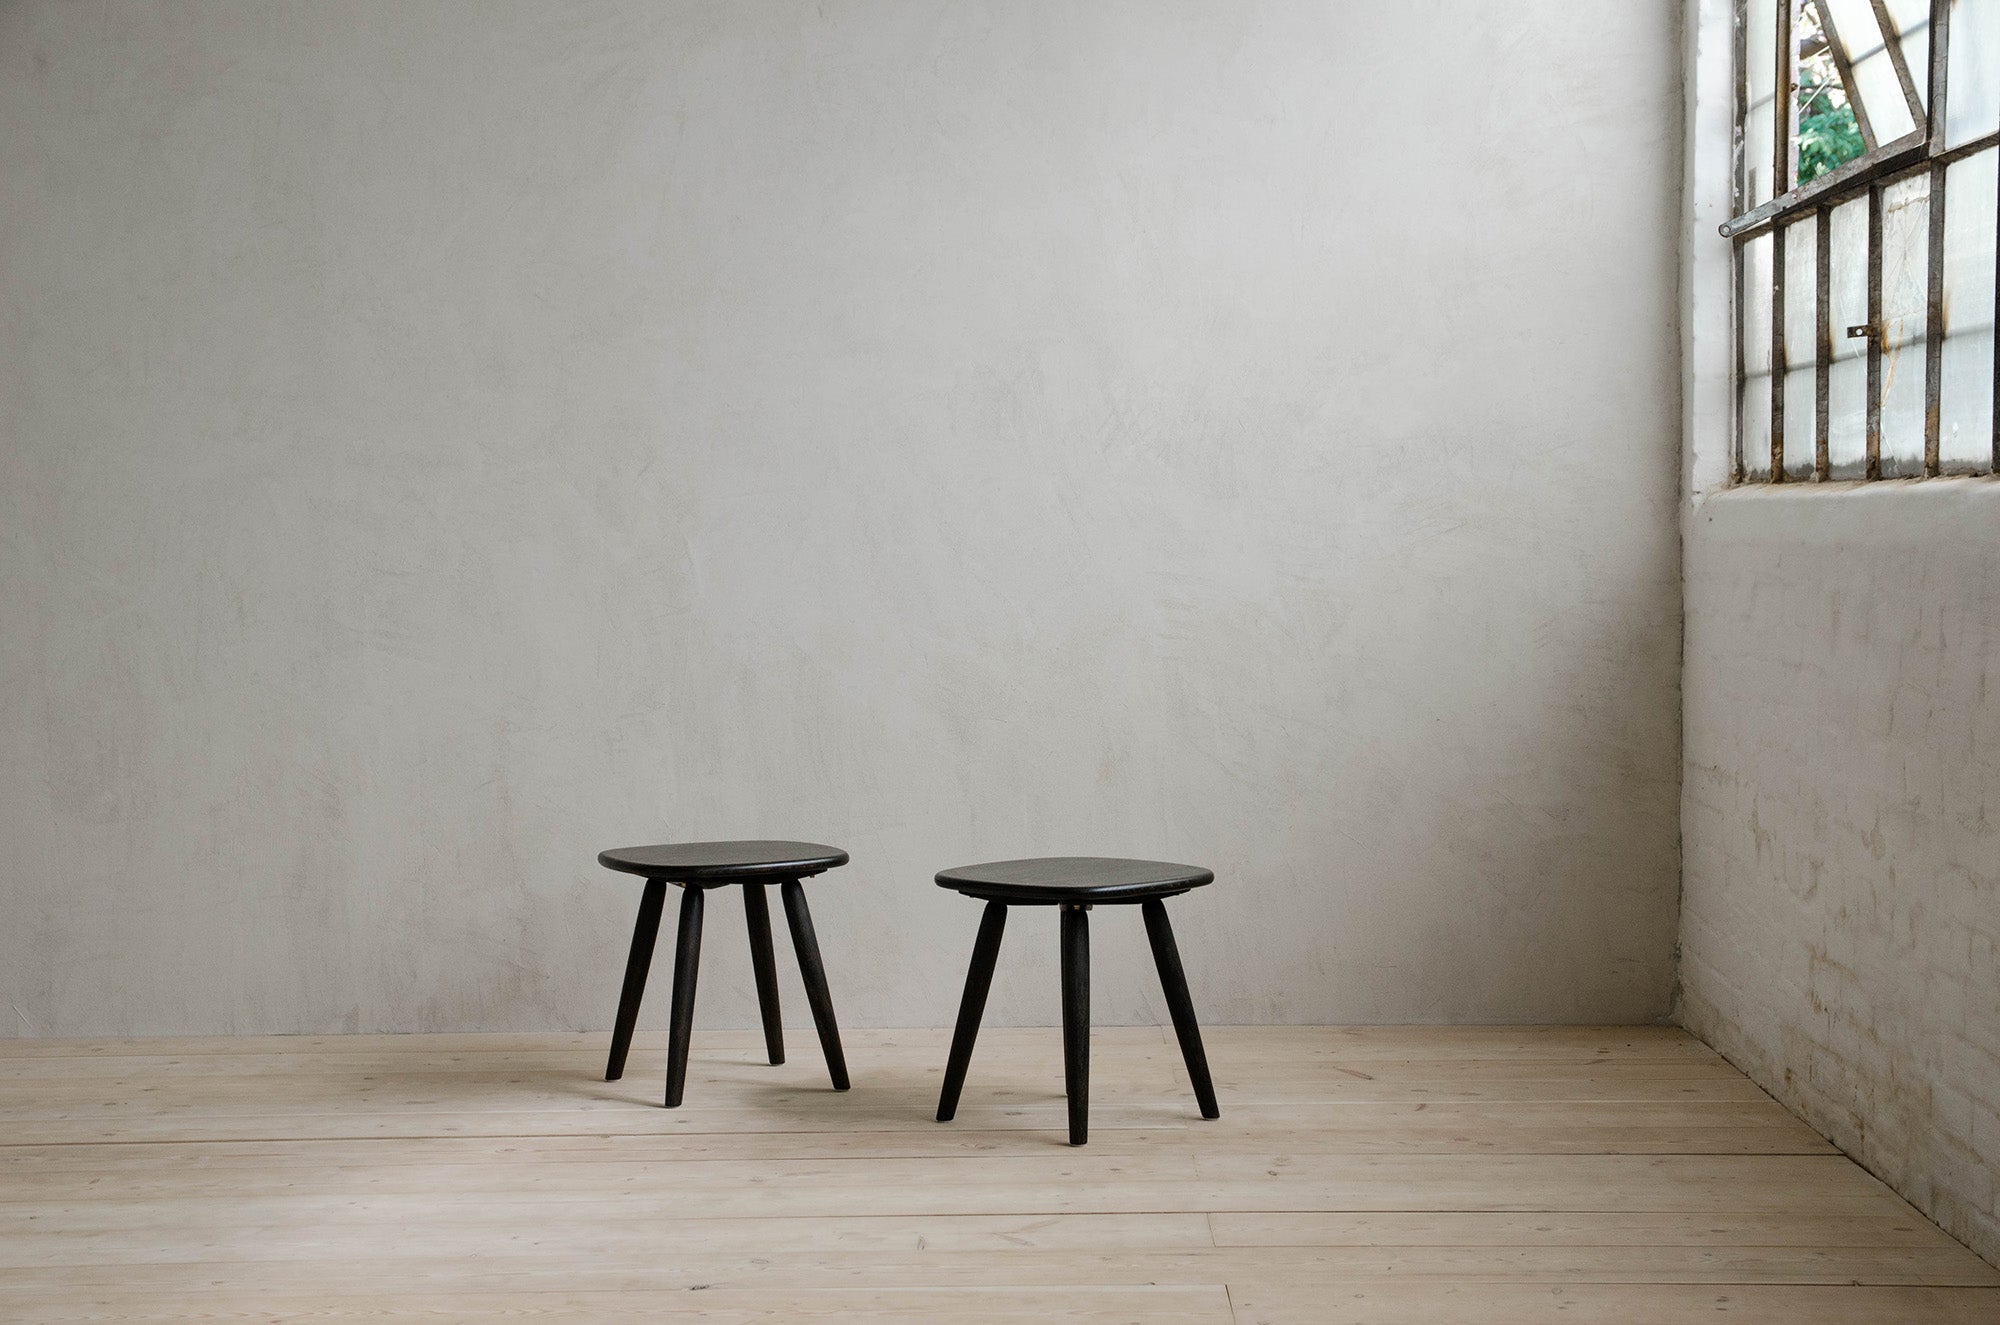 Two Small Nomad Side Tables in Empty Modern Room